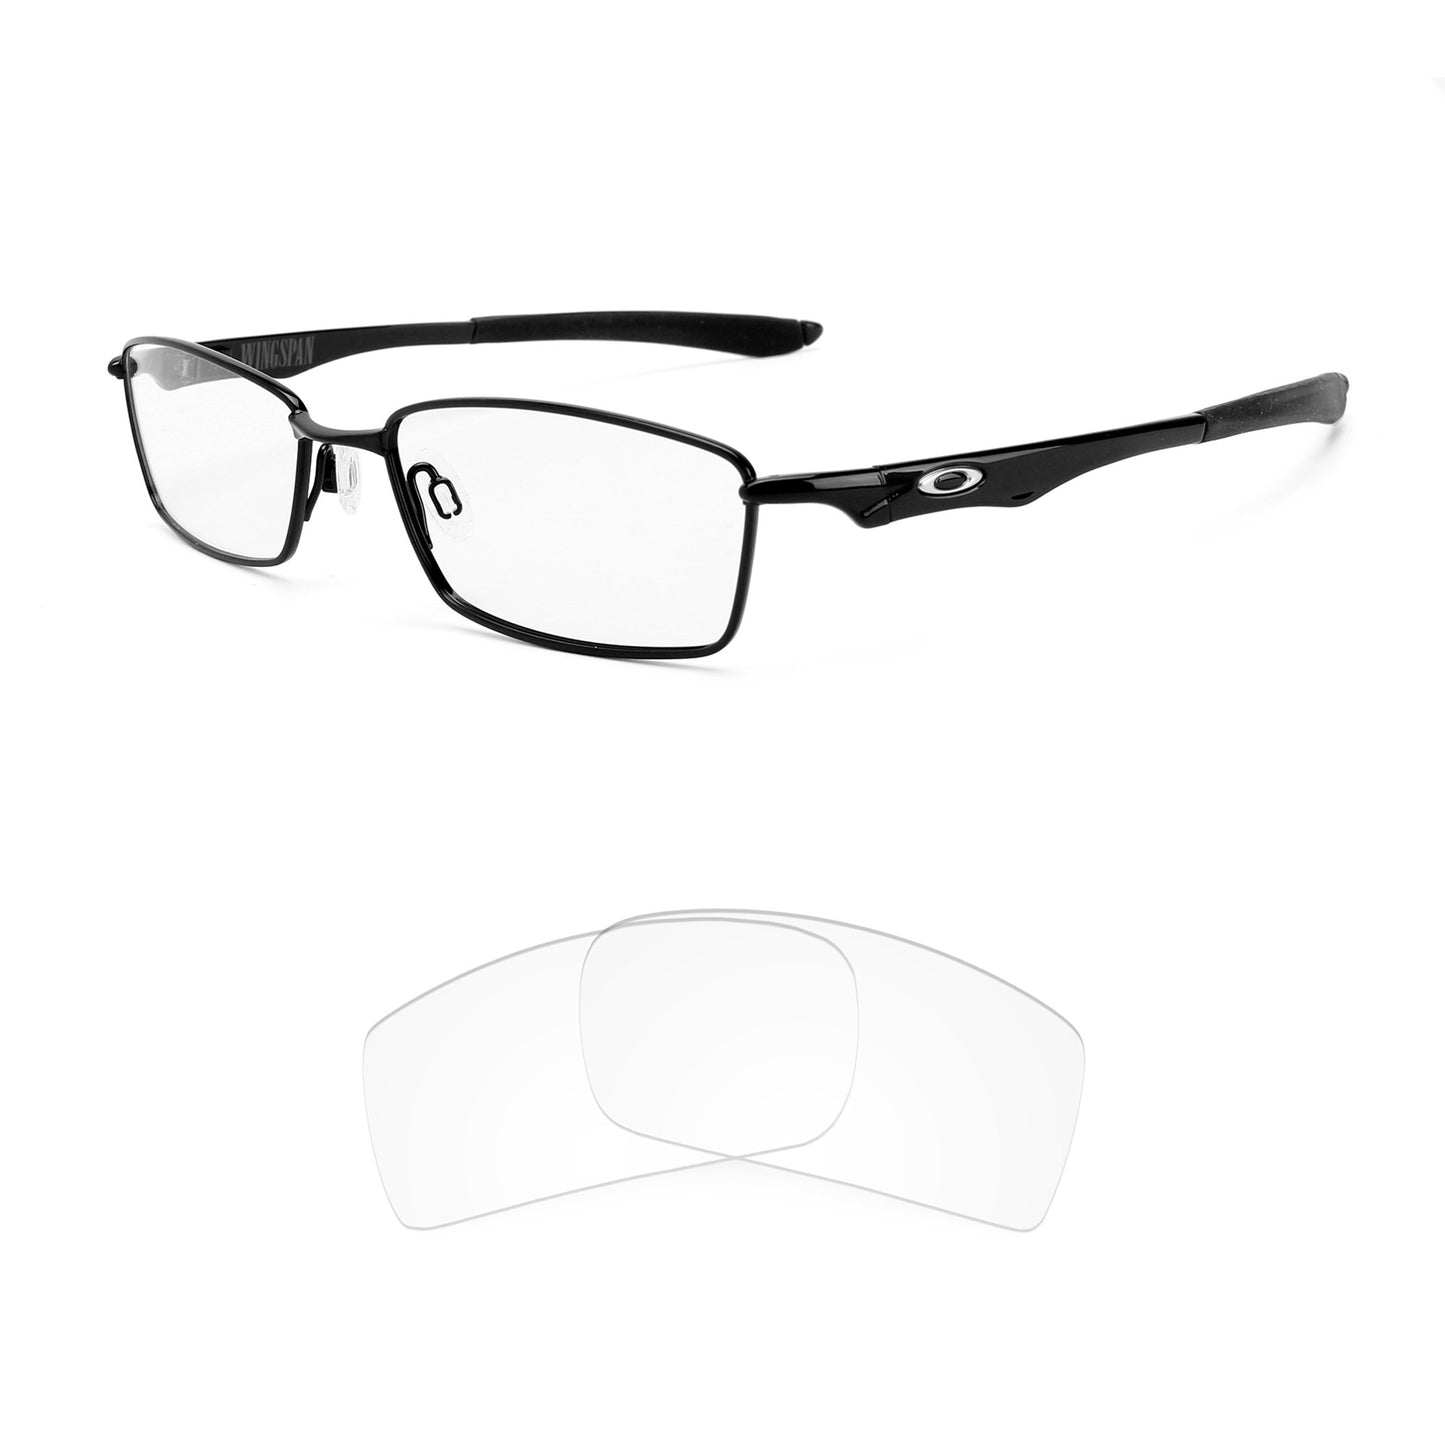 Oakley Wingspan sunglasses with replacement lenses